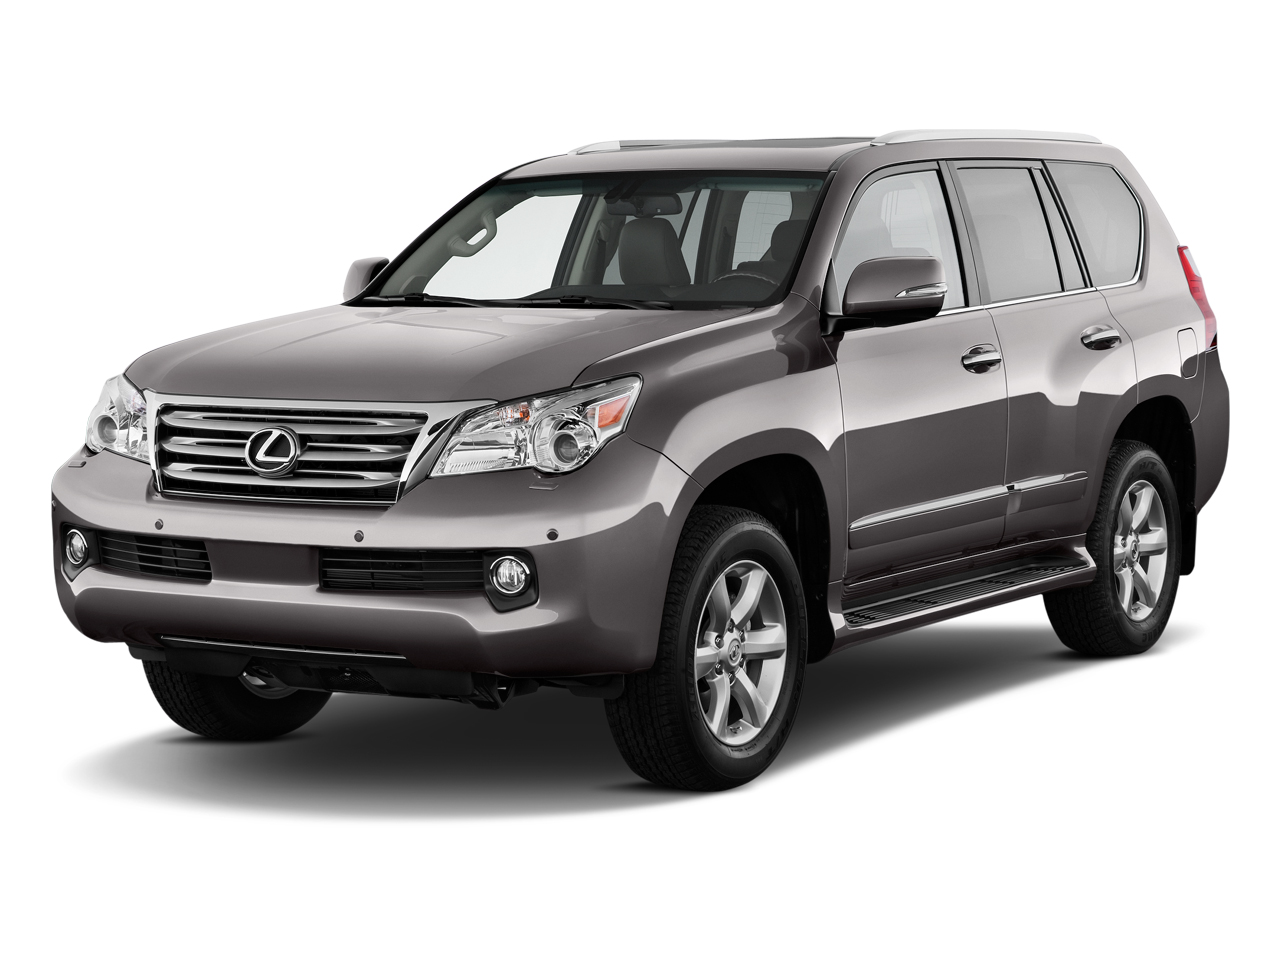 2012 Lexus GX Review, Ratings, Specs, Prices, and Photos - The Car